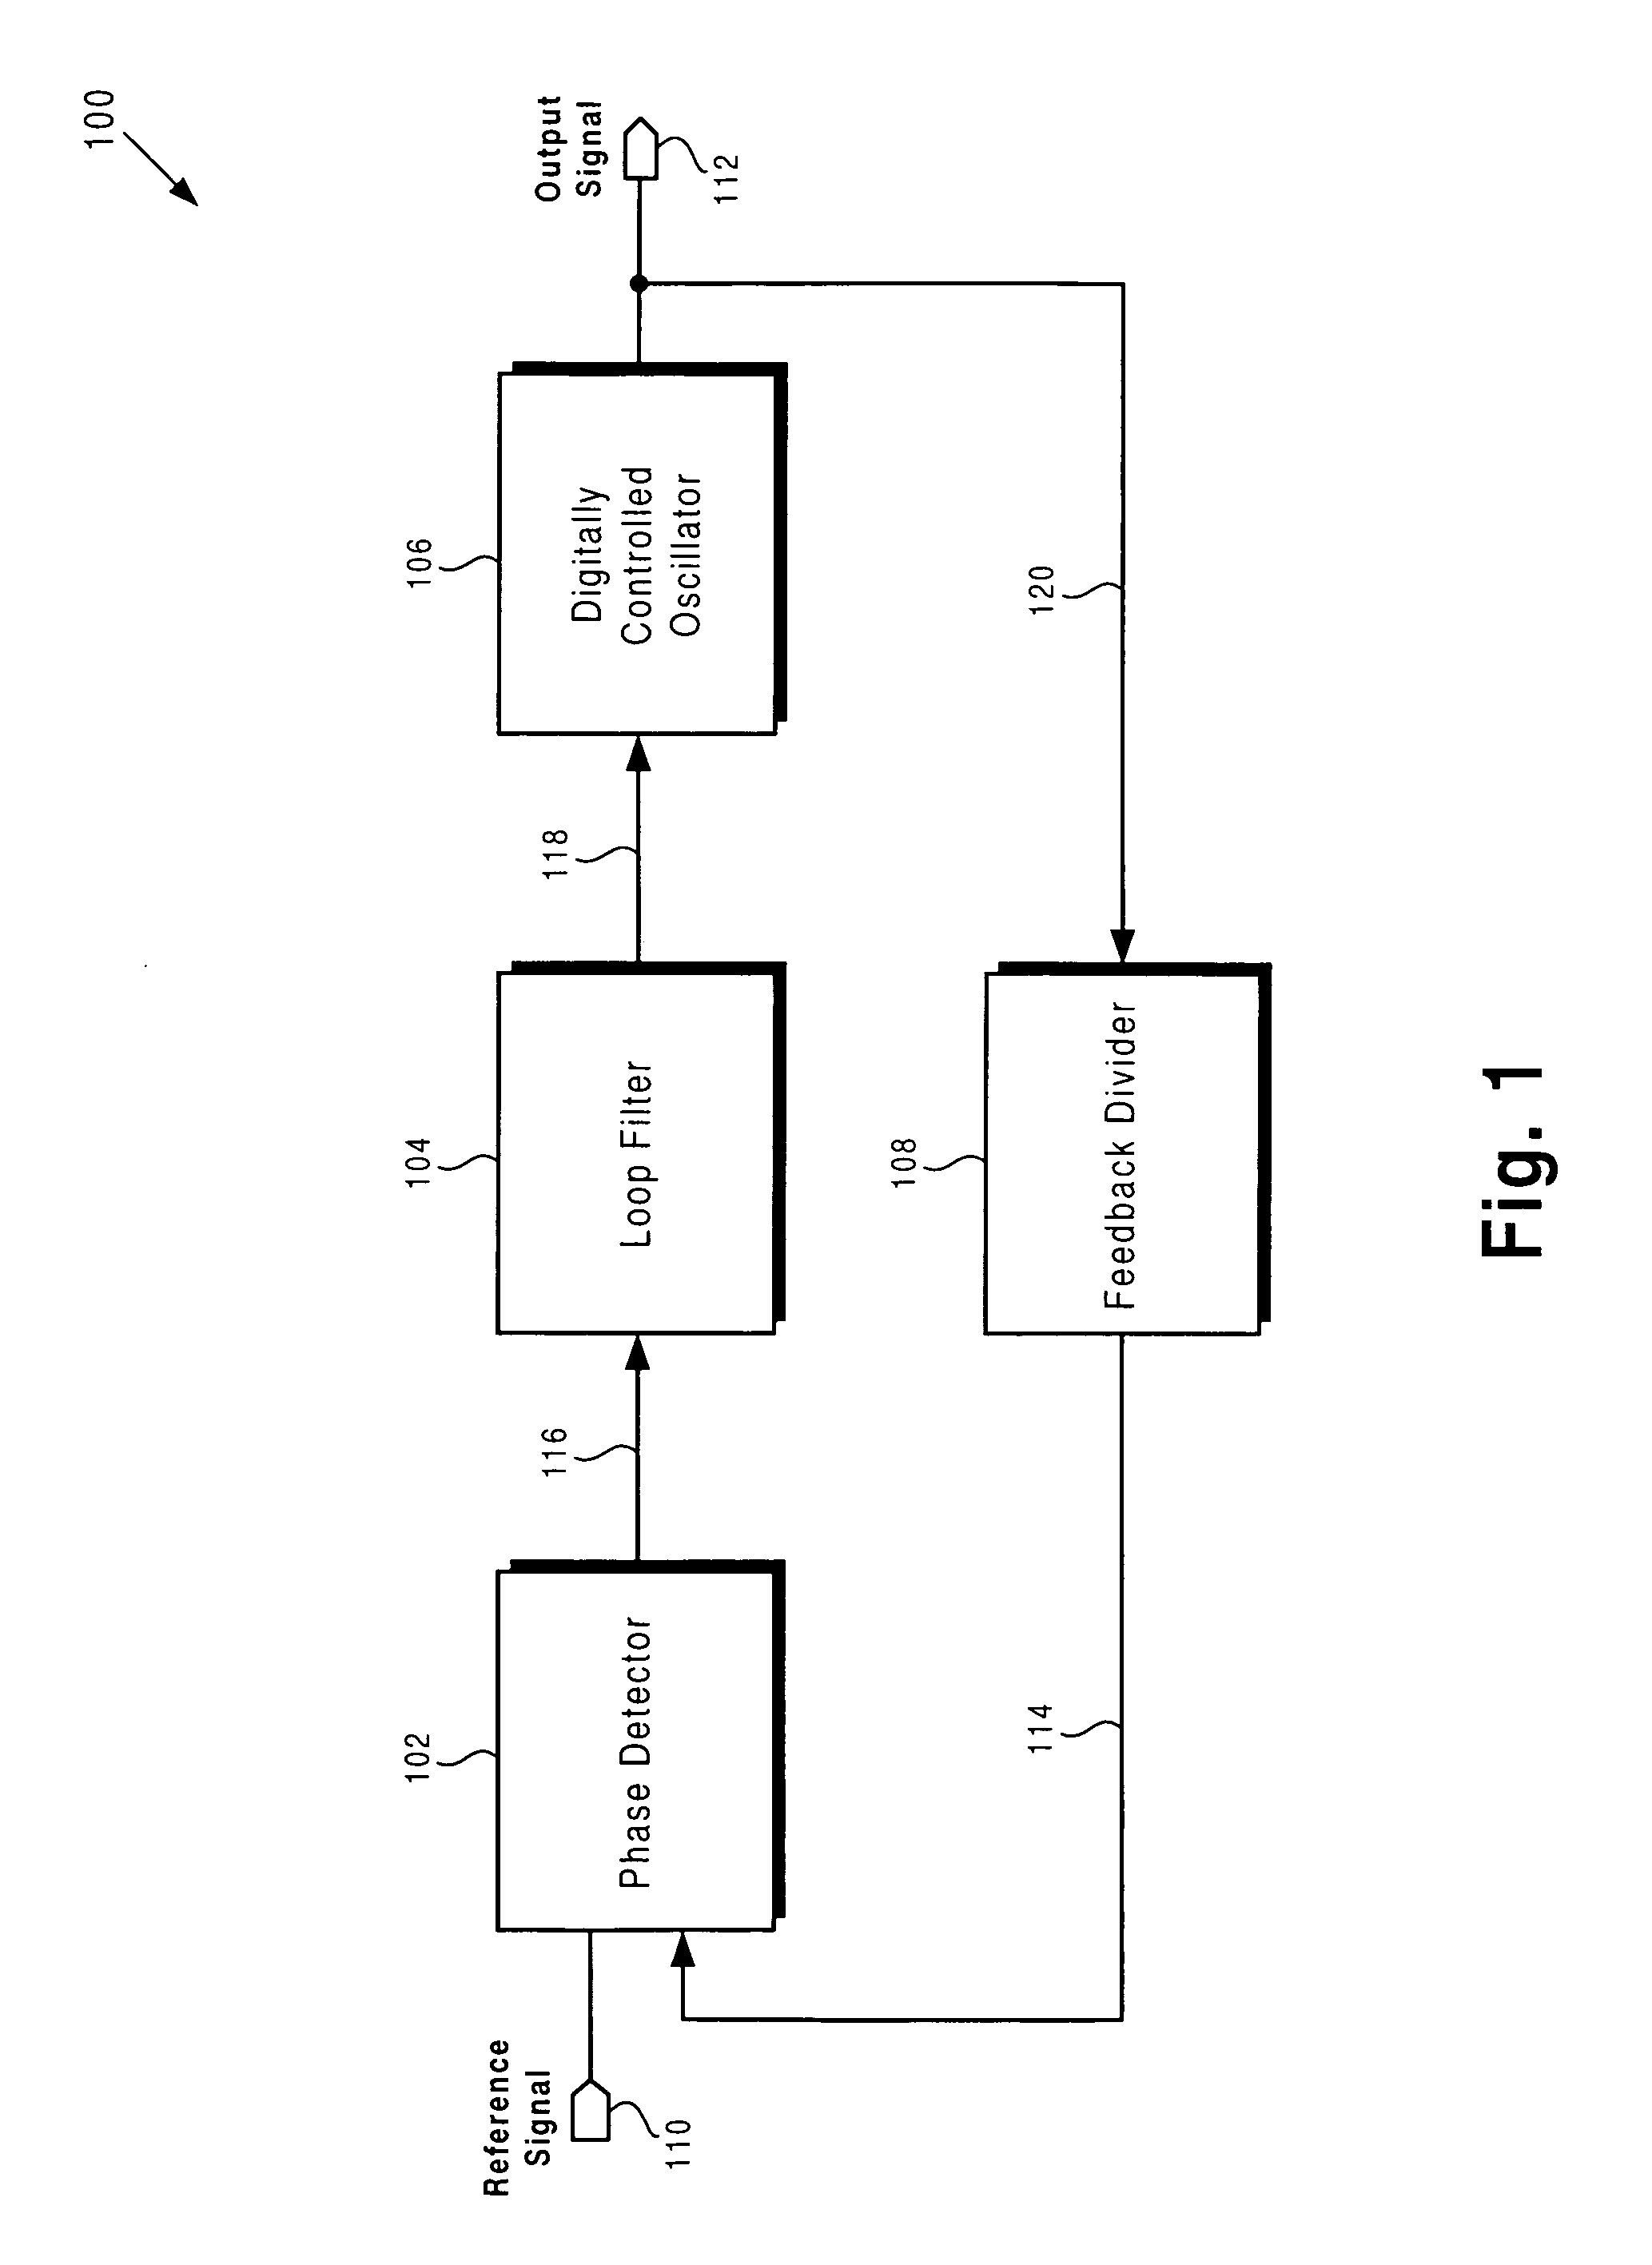 Capacitive tuning network for low gain digitally controlled oscillator